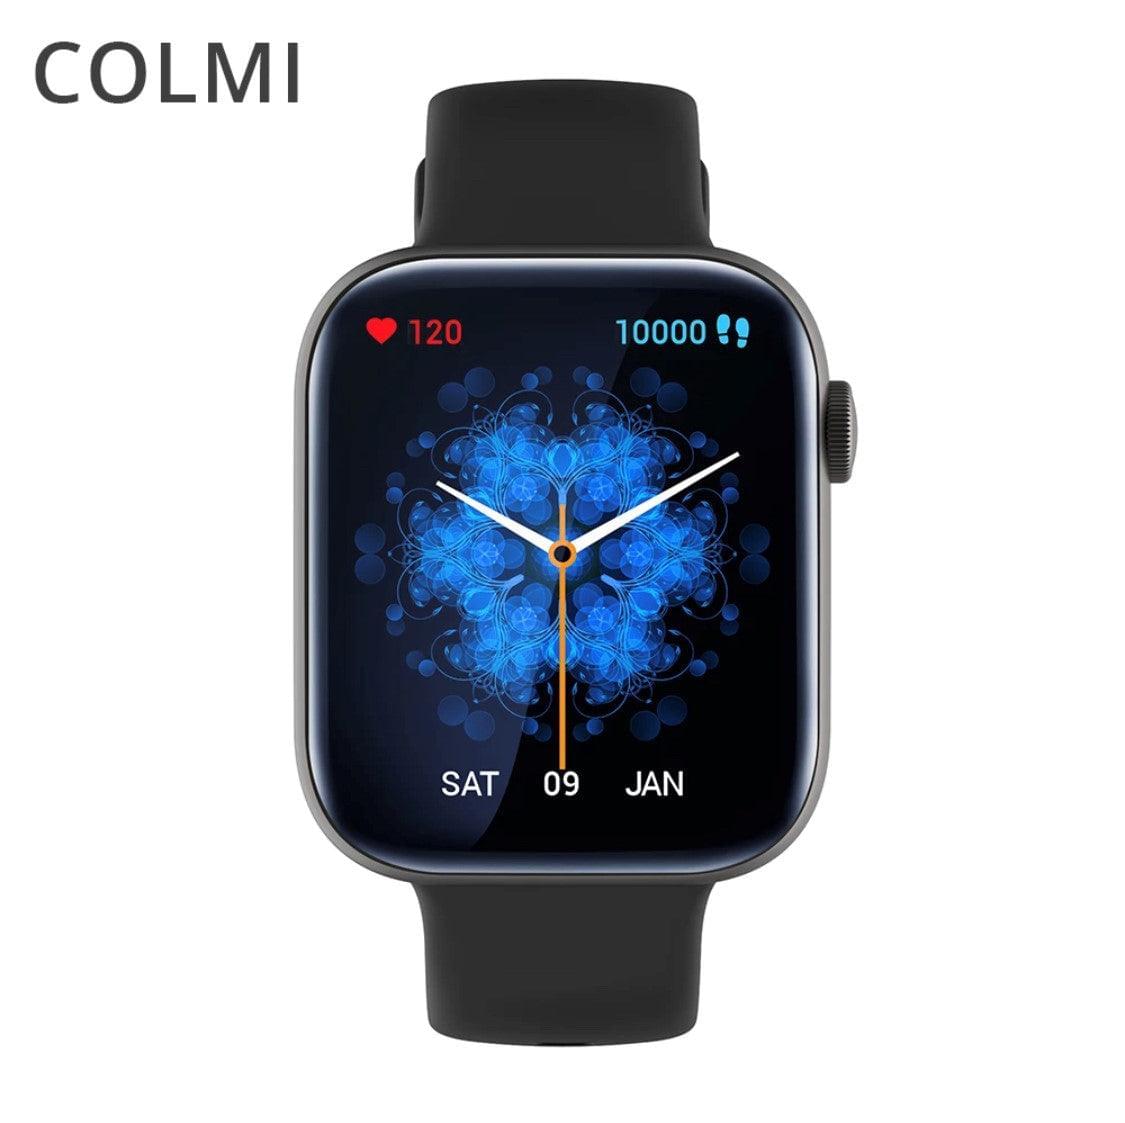 COLMI P45 Black Smart Watch South Africa